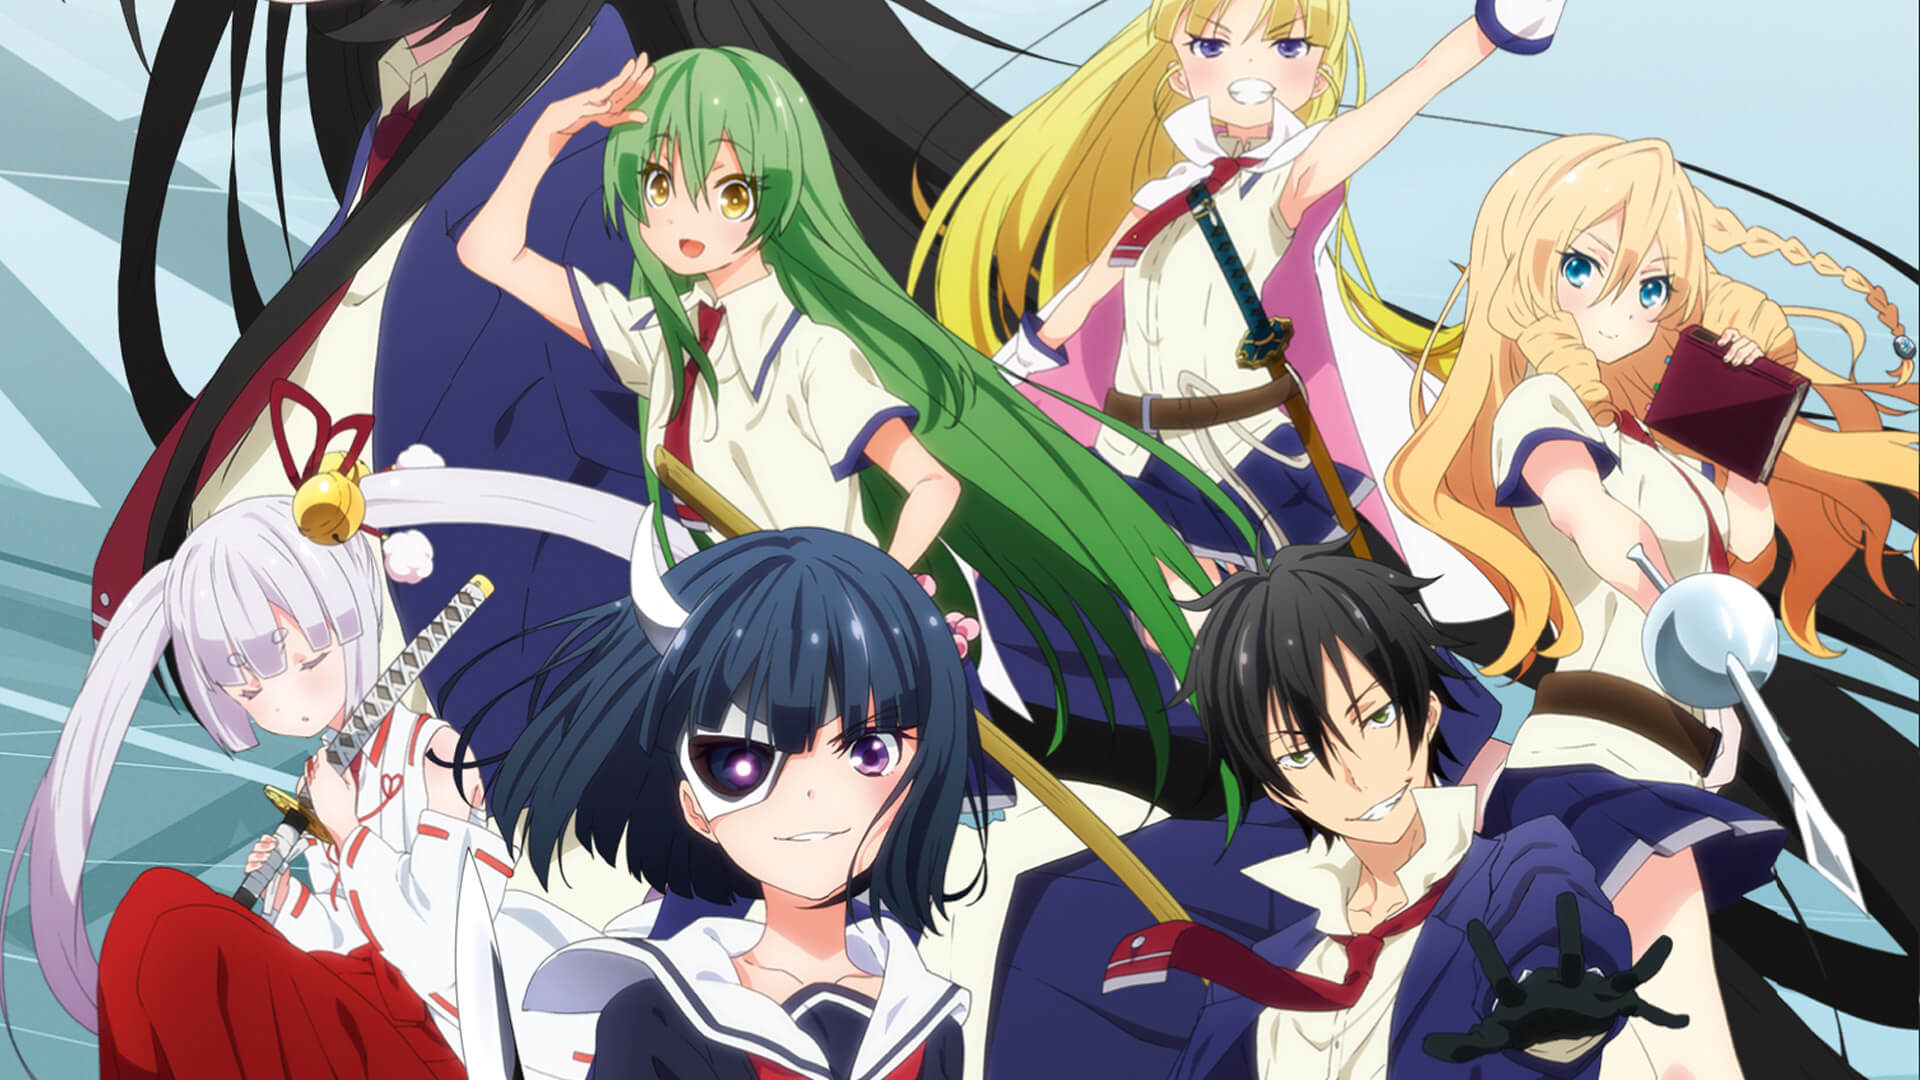 Check out what I thought of the full season in my Armed Girl’s Machiavellis...